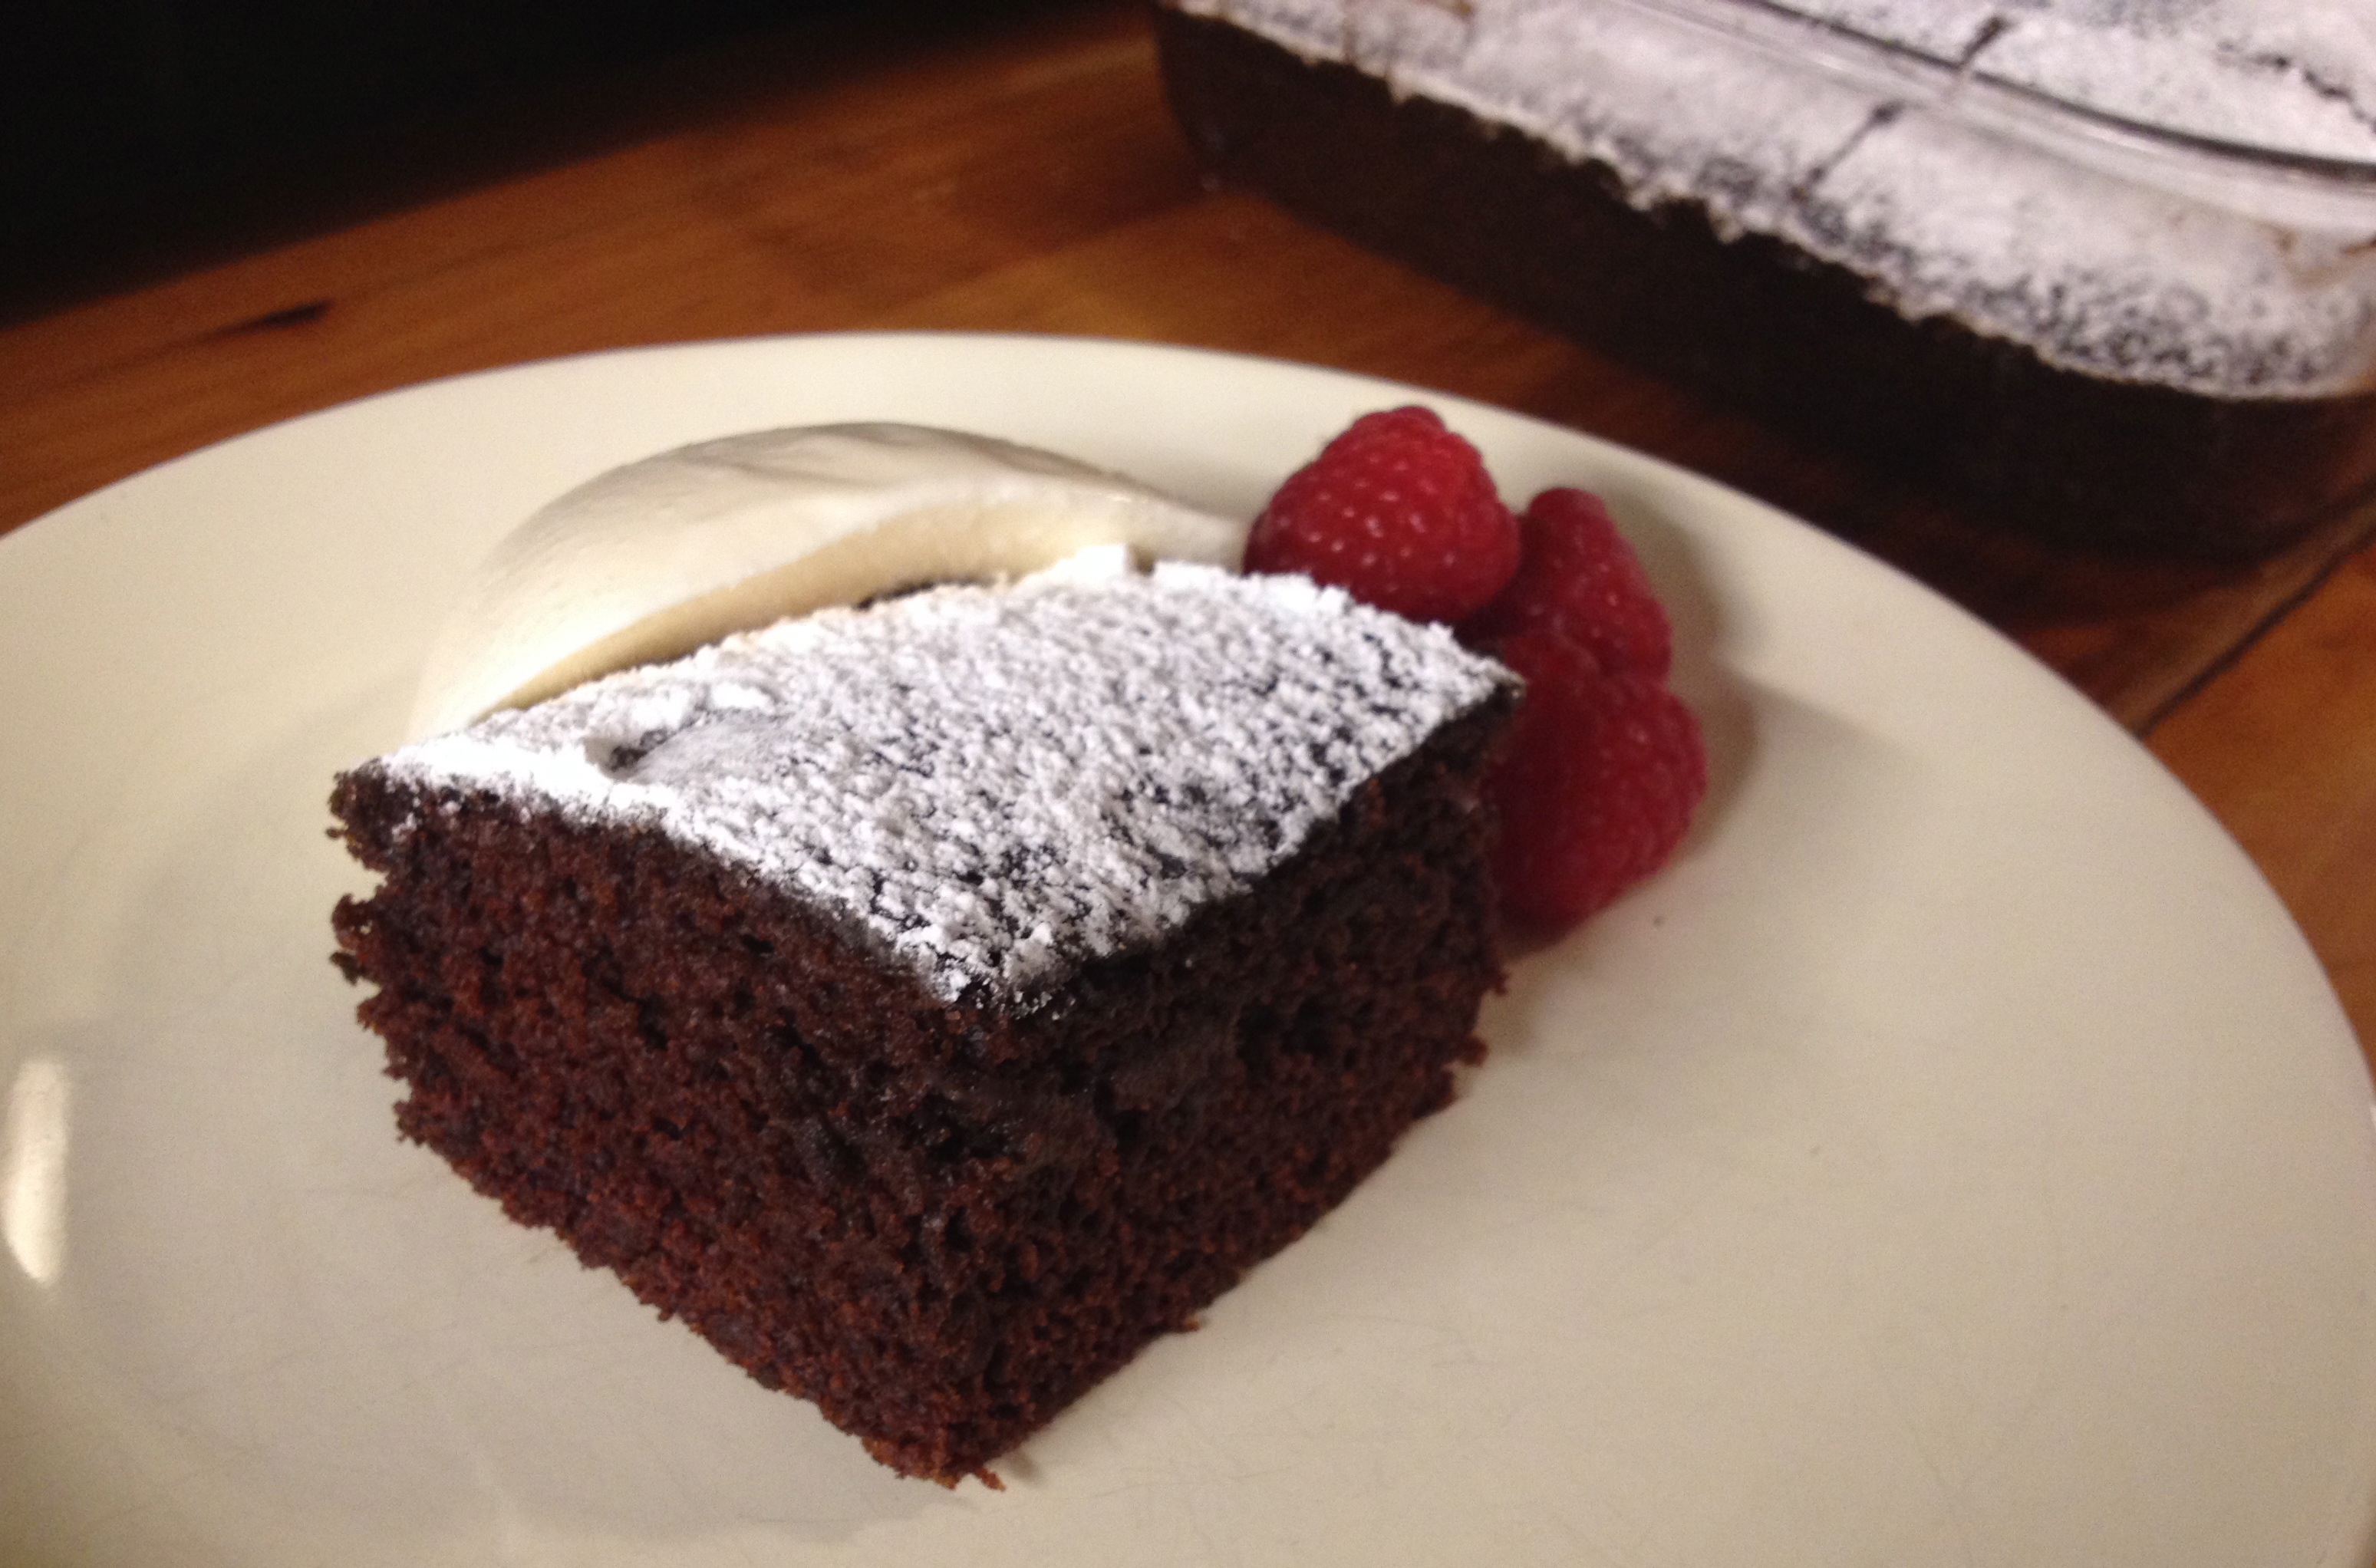 Made-in-the-Pan Chocolate Cake - LOVE-the secret ingredient